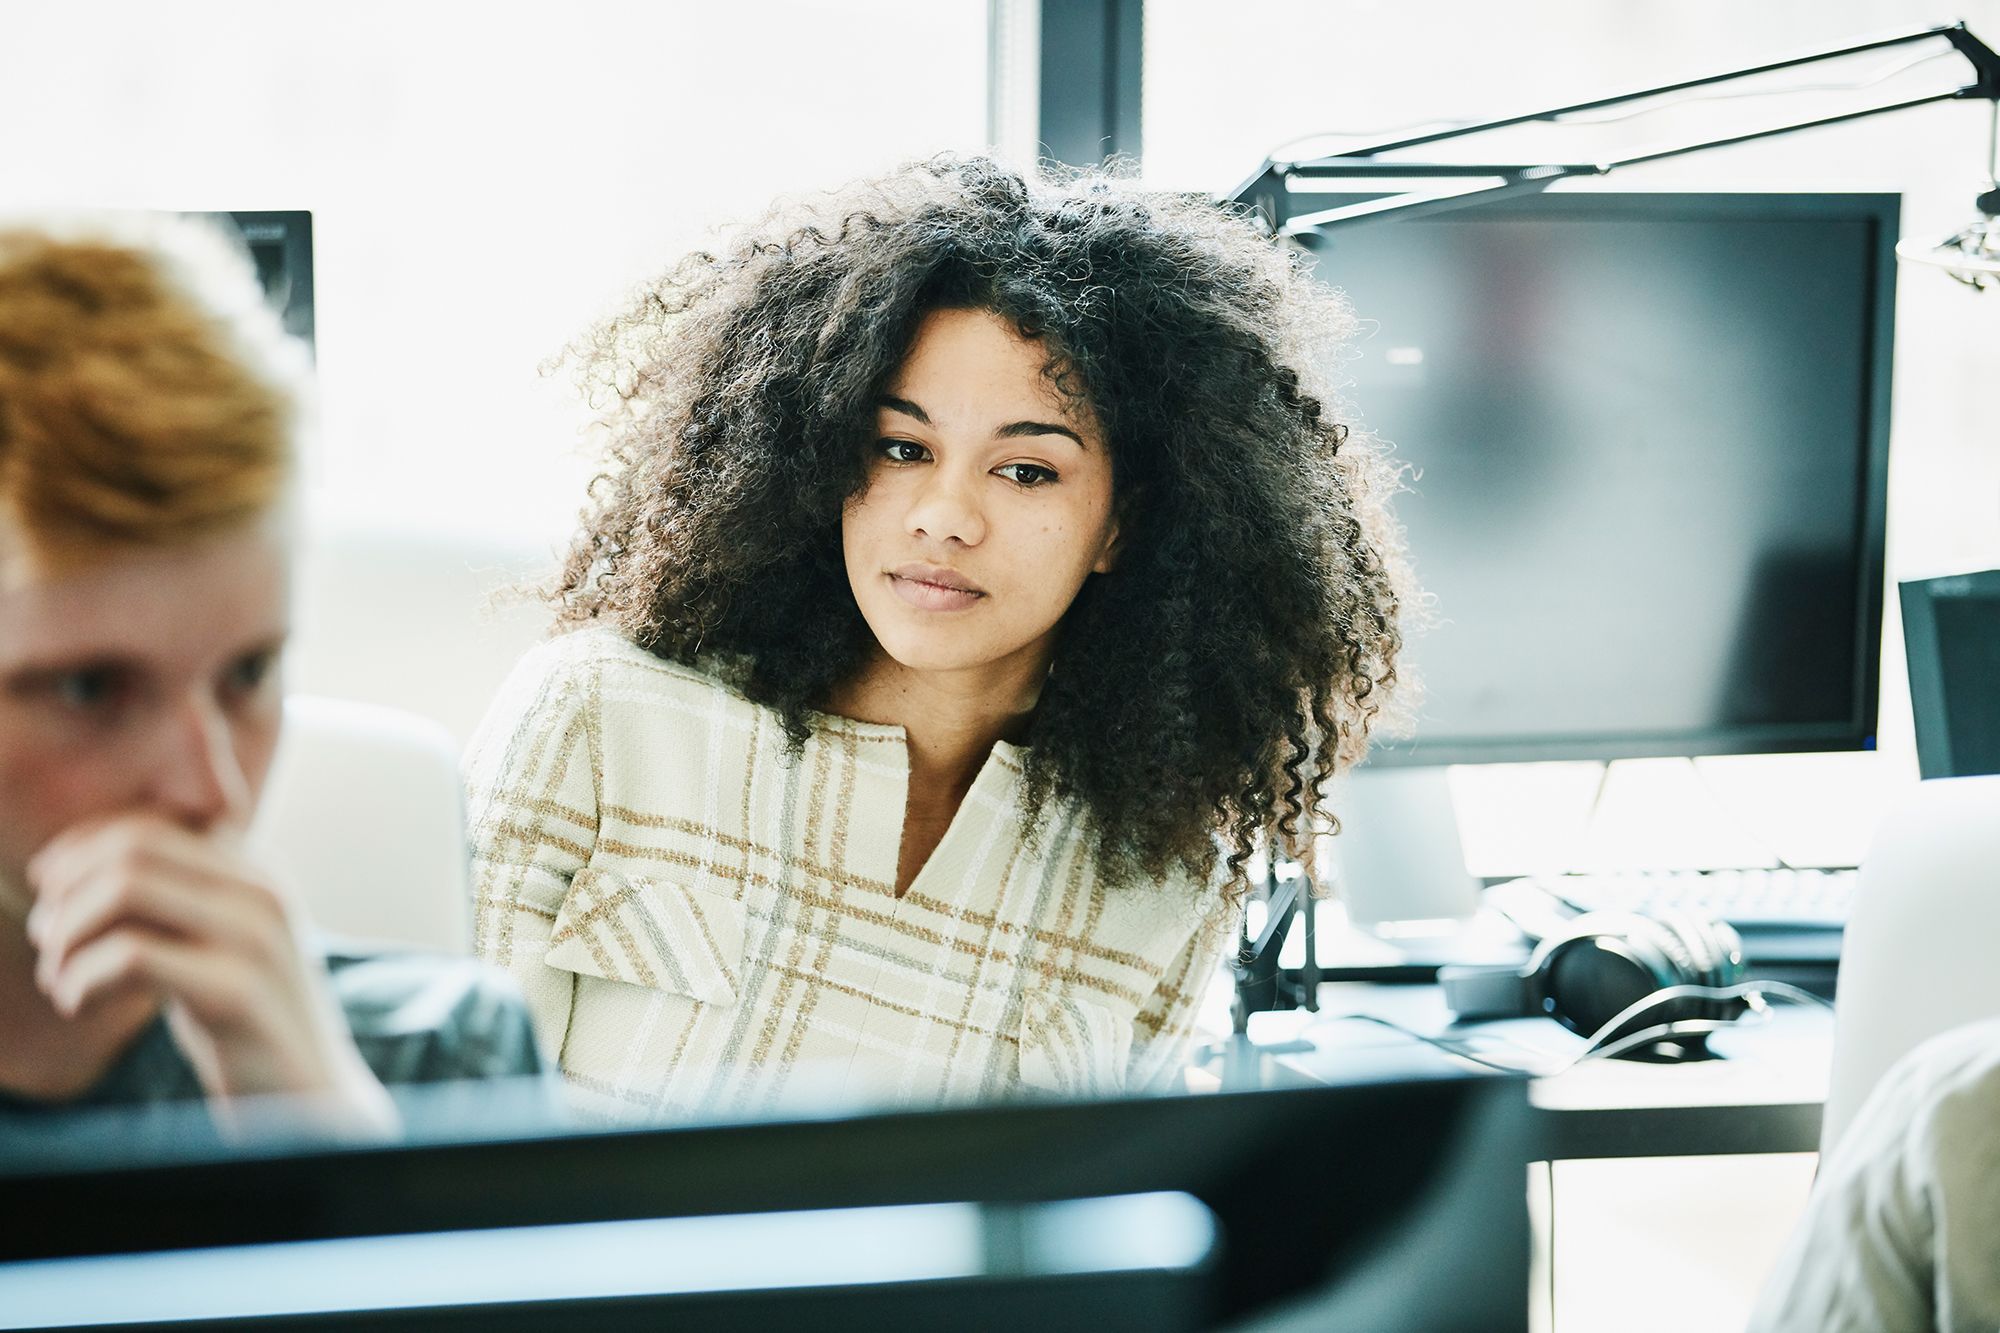 Black women with natural hairstyles are less likely to get job interviews |  CNN Business